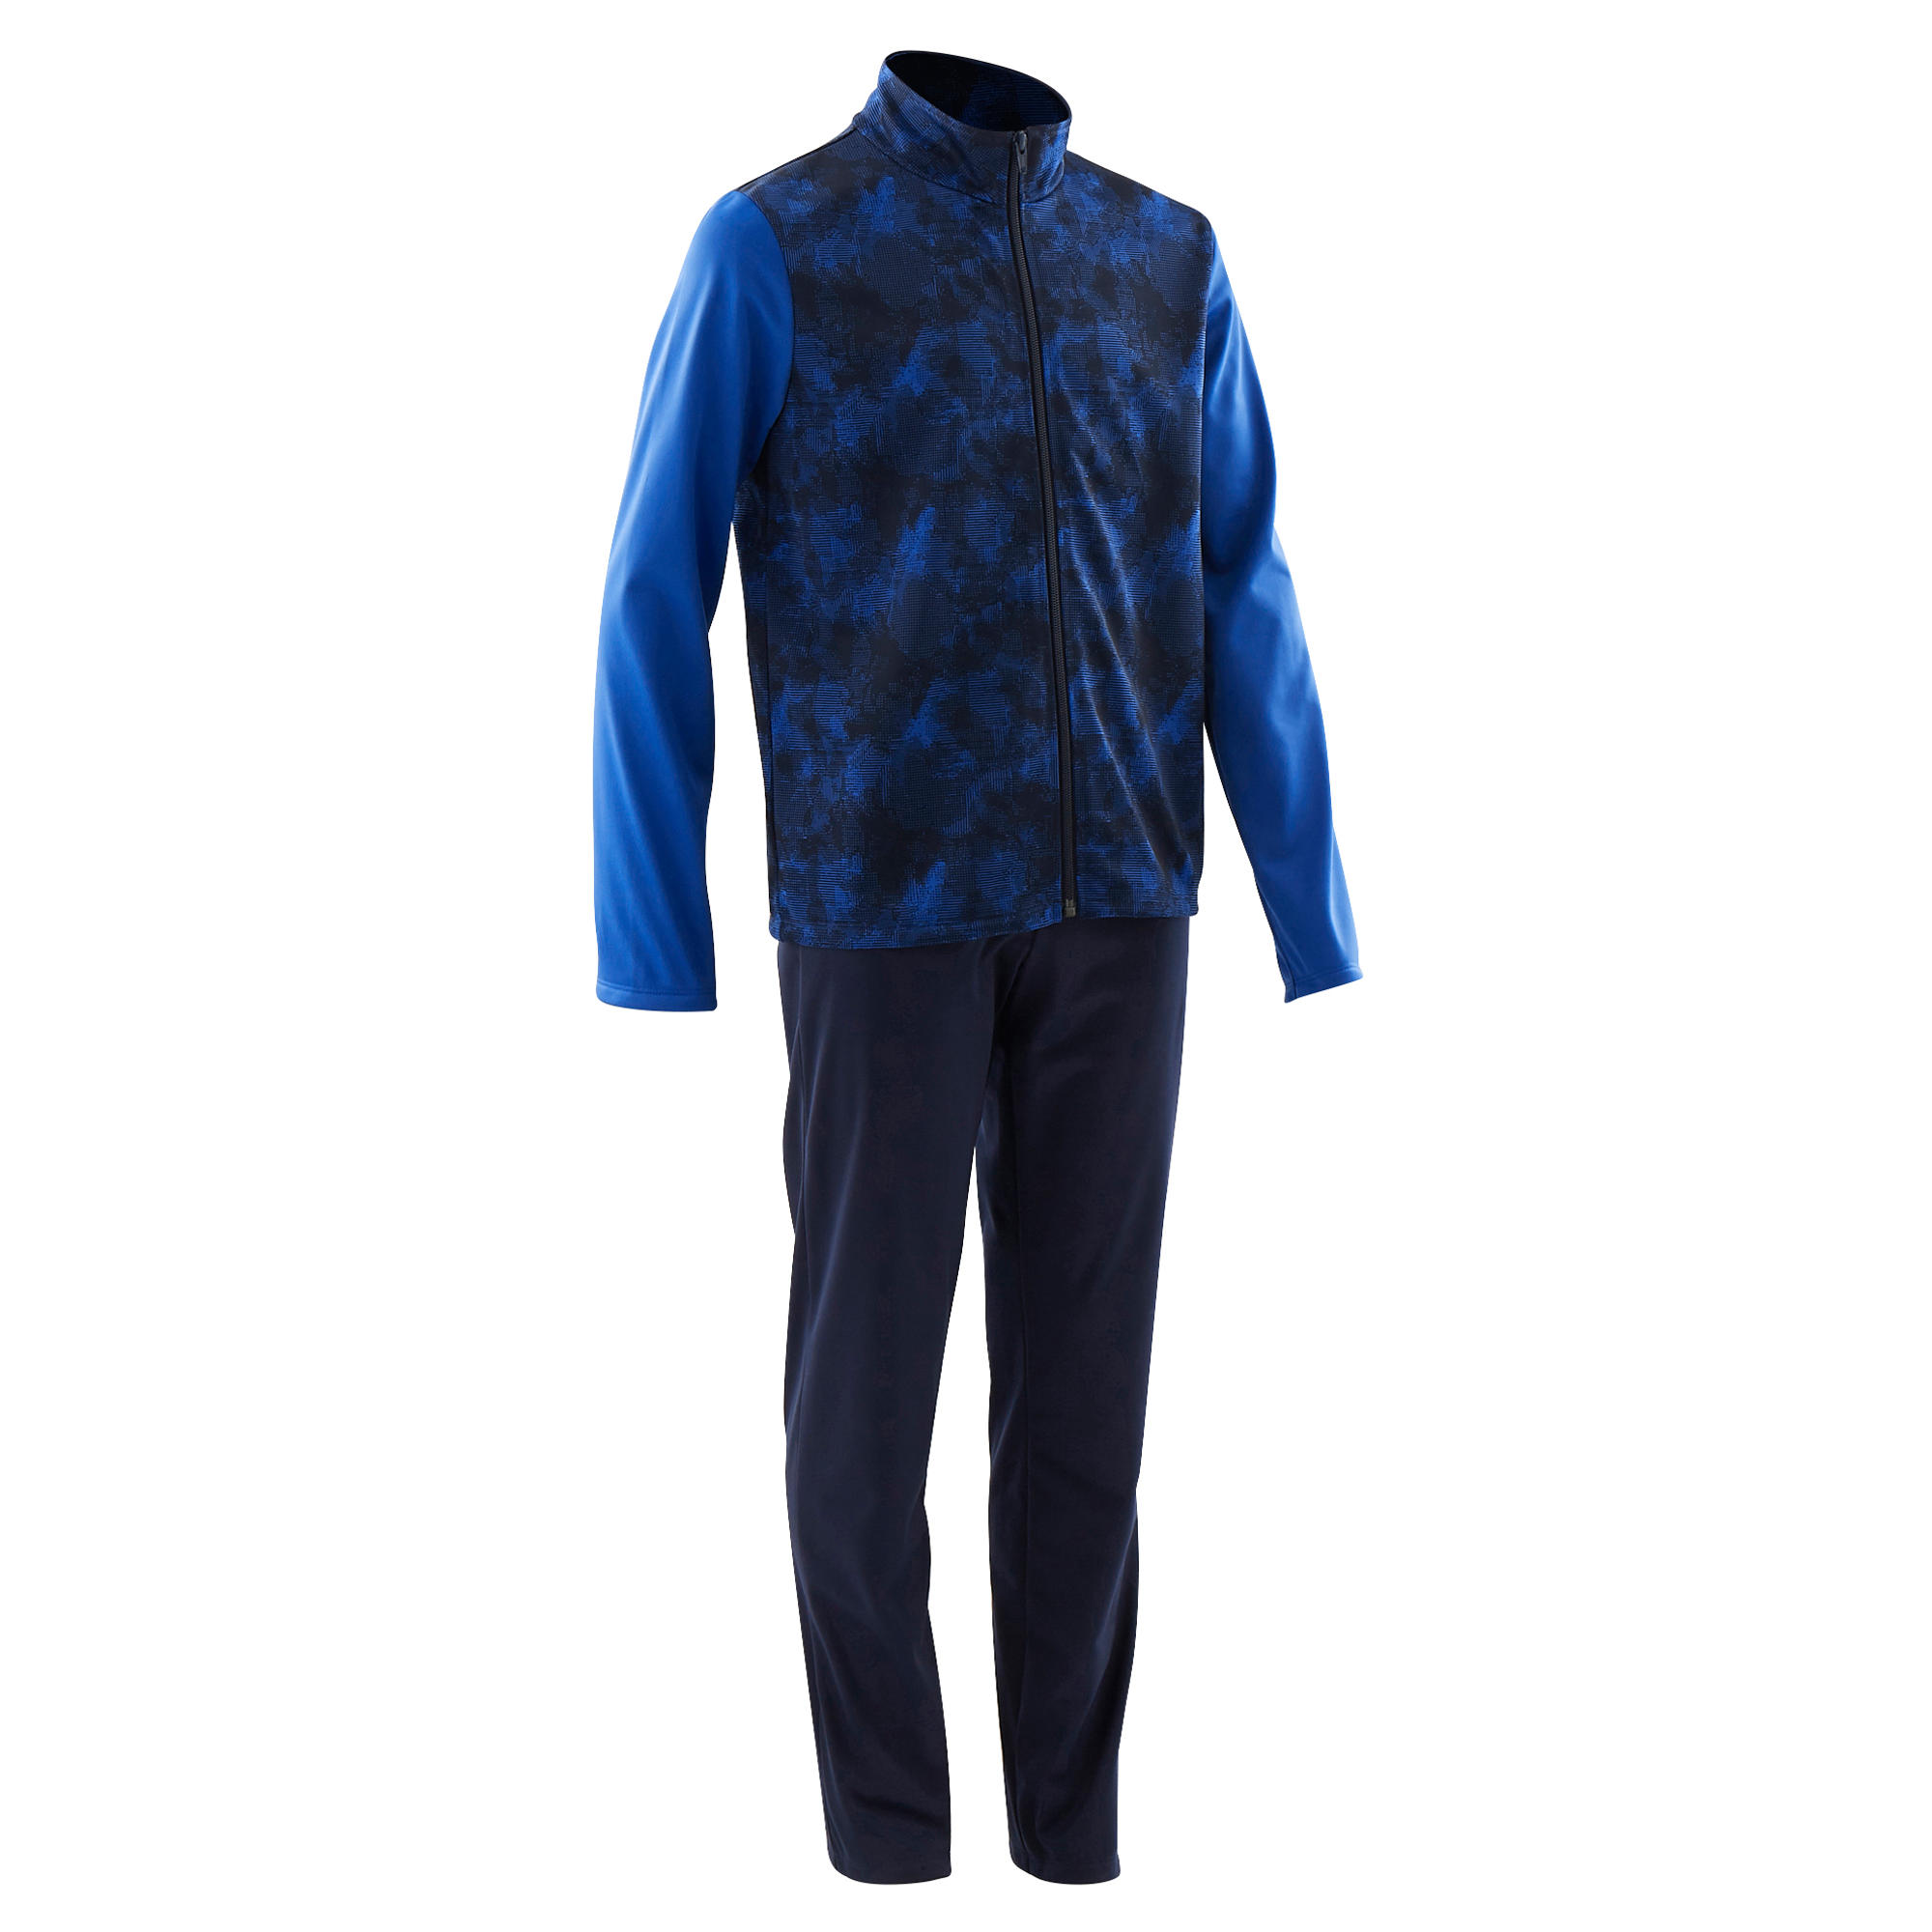 DOMYOS Kids' Basic Synthetic Breathable Tracksuit Gym'Y - Blue/Blue Print